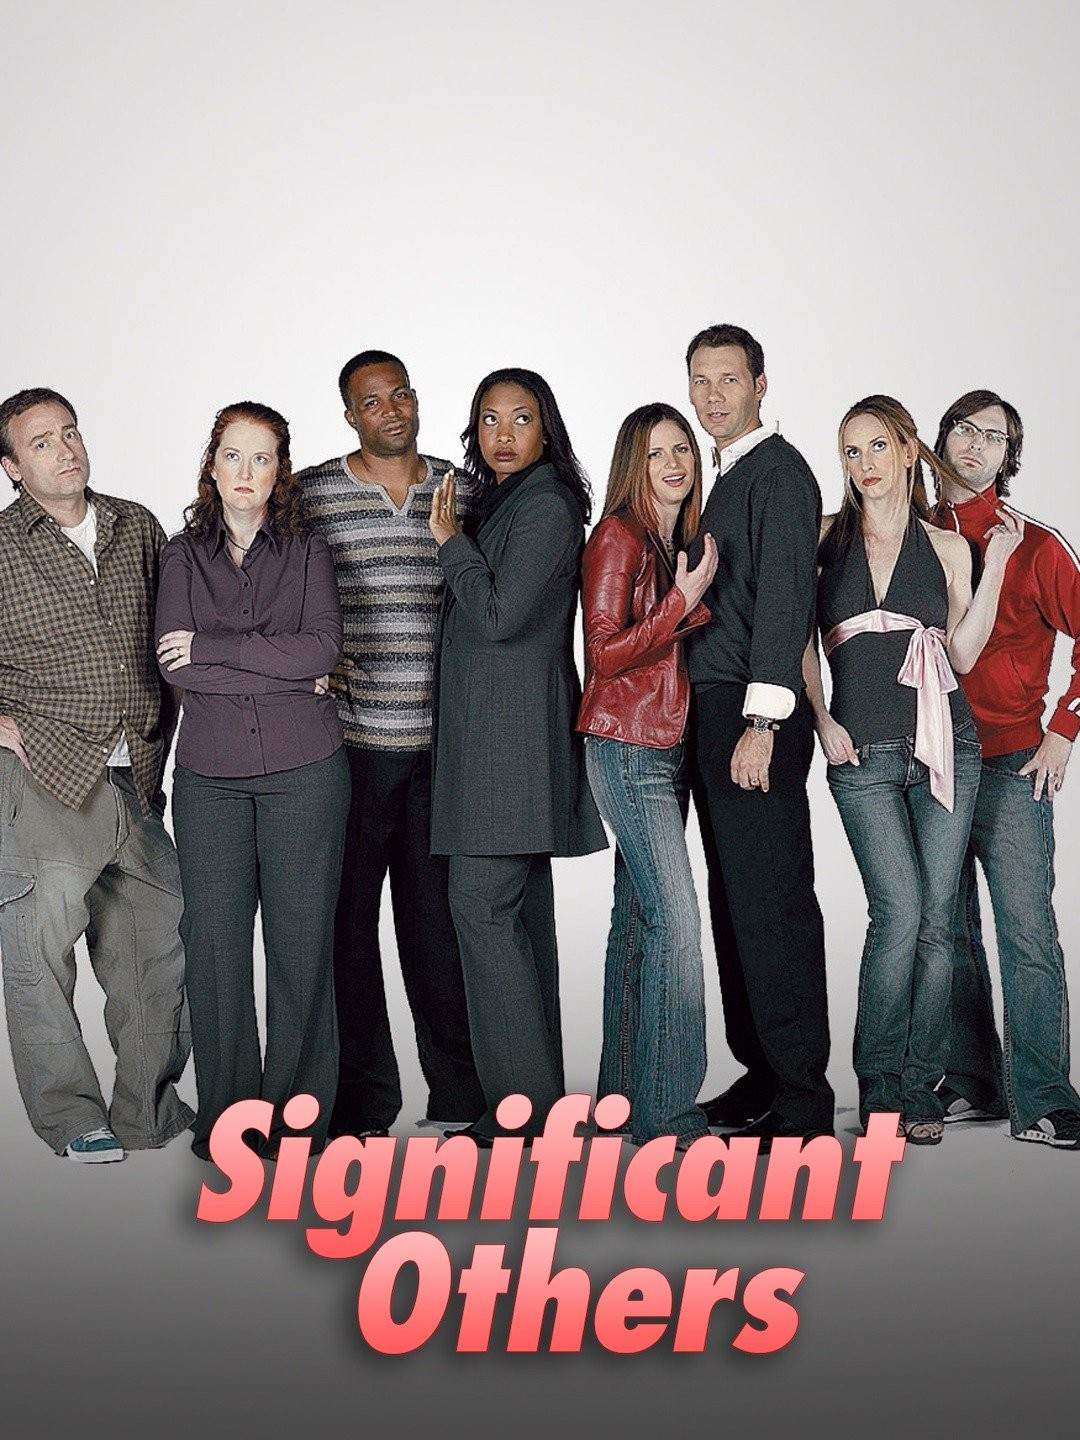 Significant others